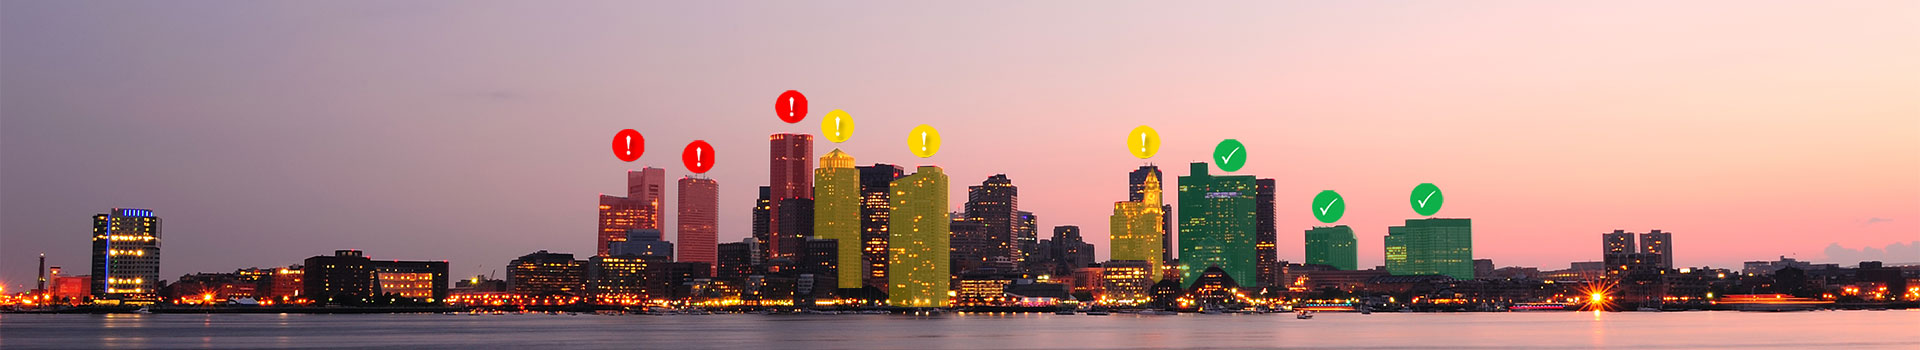 Header Banner for Zymo Environ COVID-19 Wastewater Testing Service, showing the New York city scape with checks or exclamation points above the buildings.